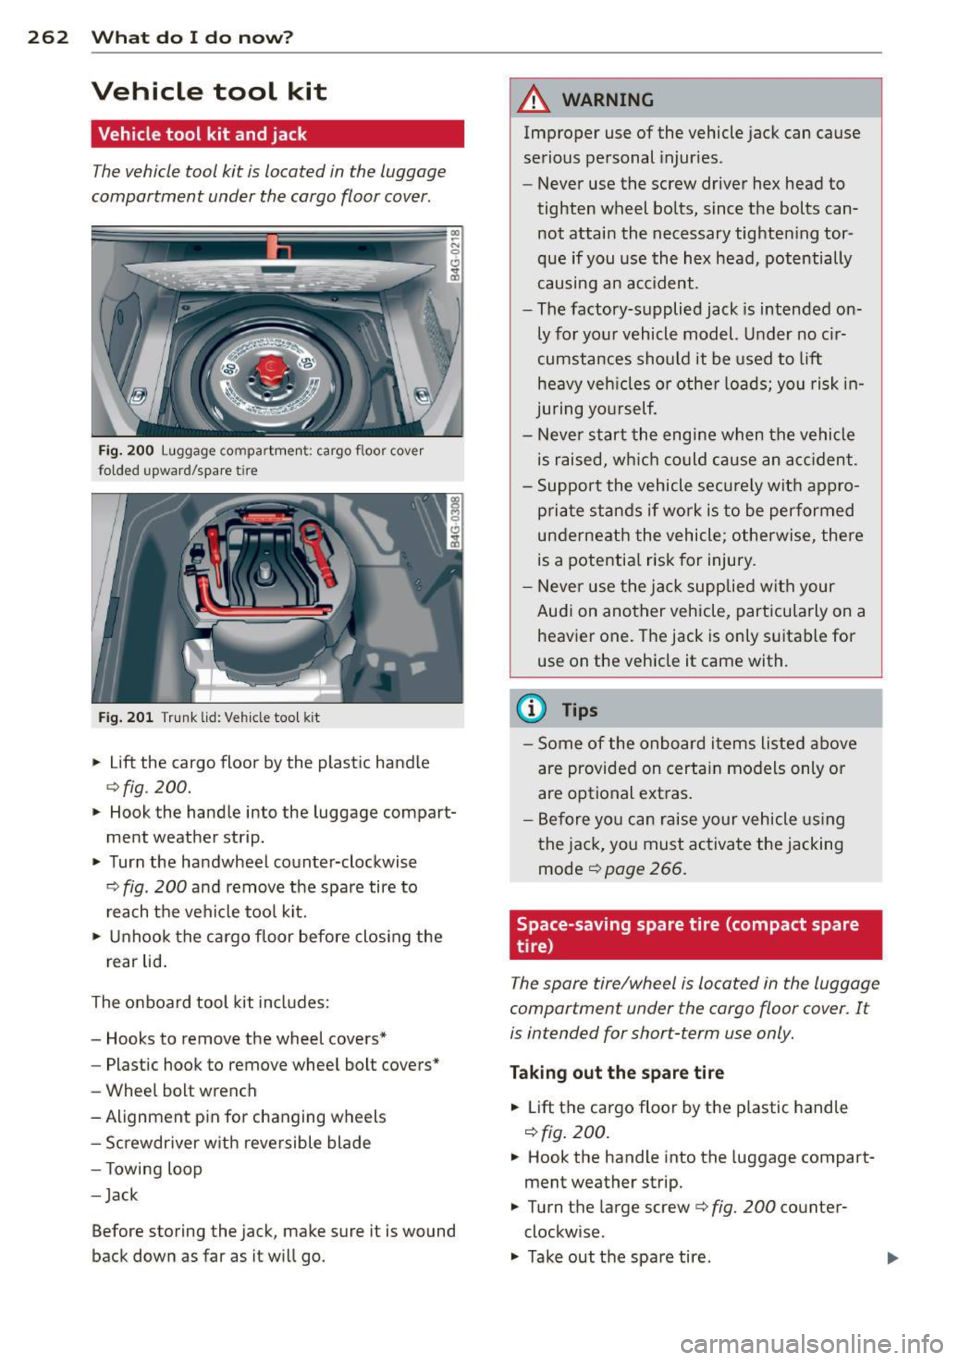 AUDI S6 2013  Owners Manual 262  What  do  I  do  now? 
Vehicle  tool  kit 
Vehicle tool  kit  and jack 
The vehicle  tool  kit  is located  in  the  luggage 
compartment  under  the cargo  floor  cover . 
Fig. 200 Luggage  comp